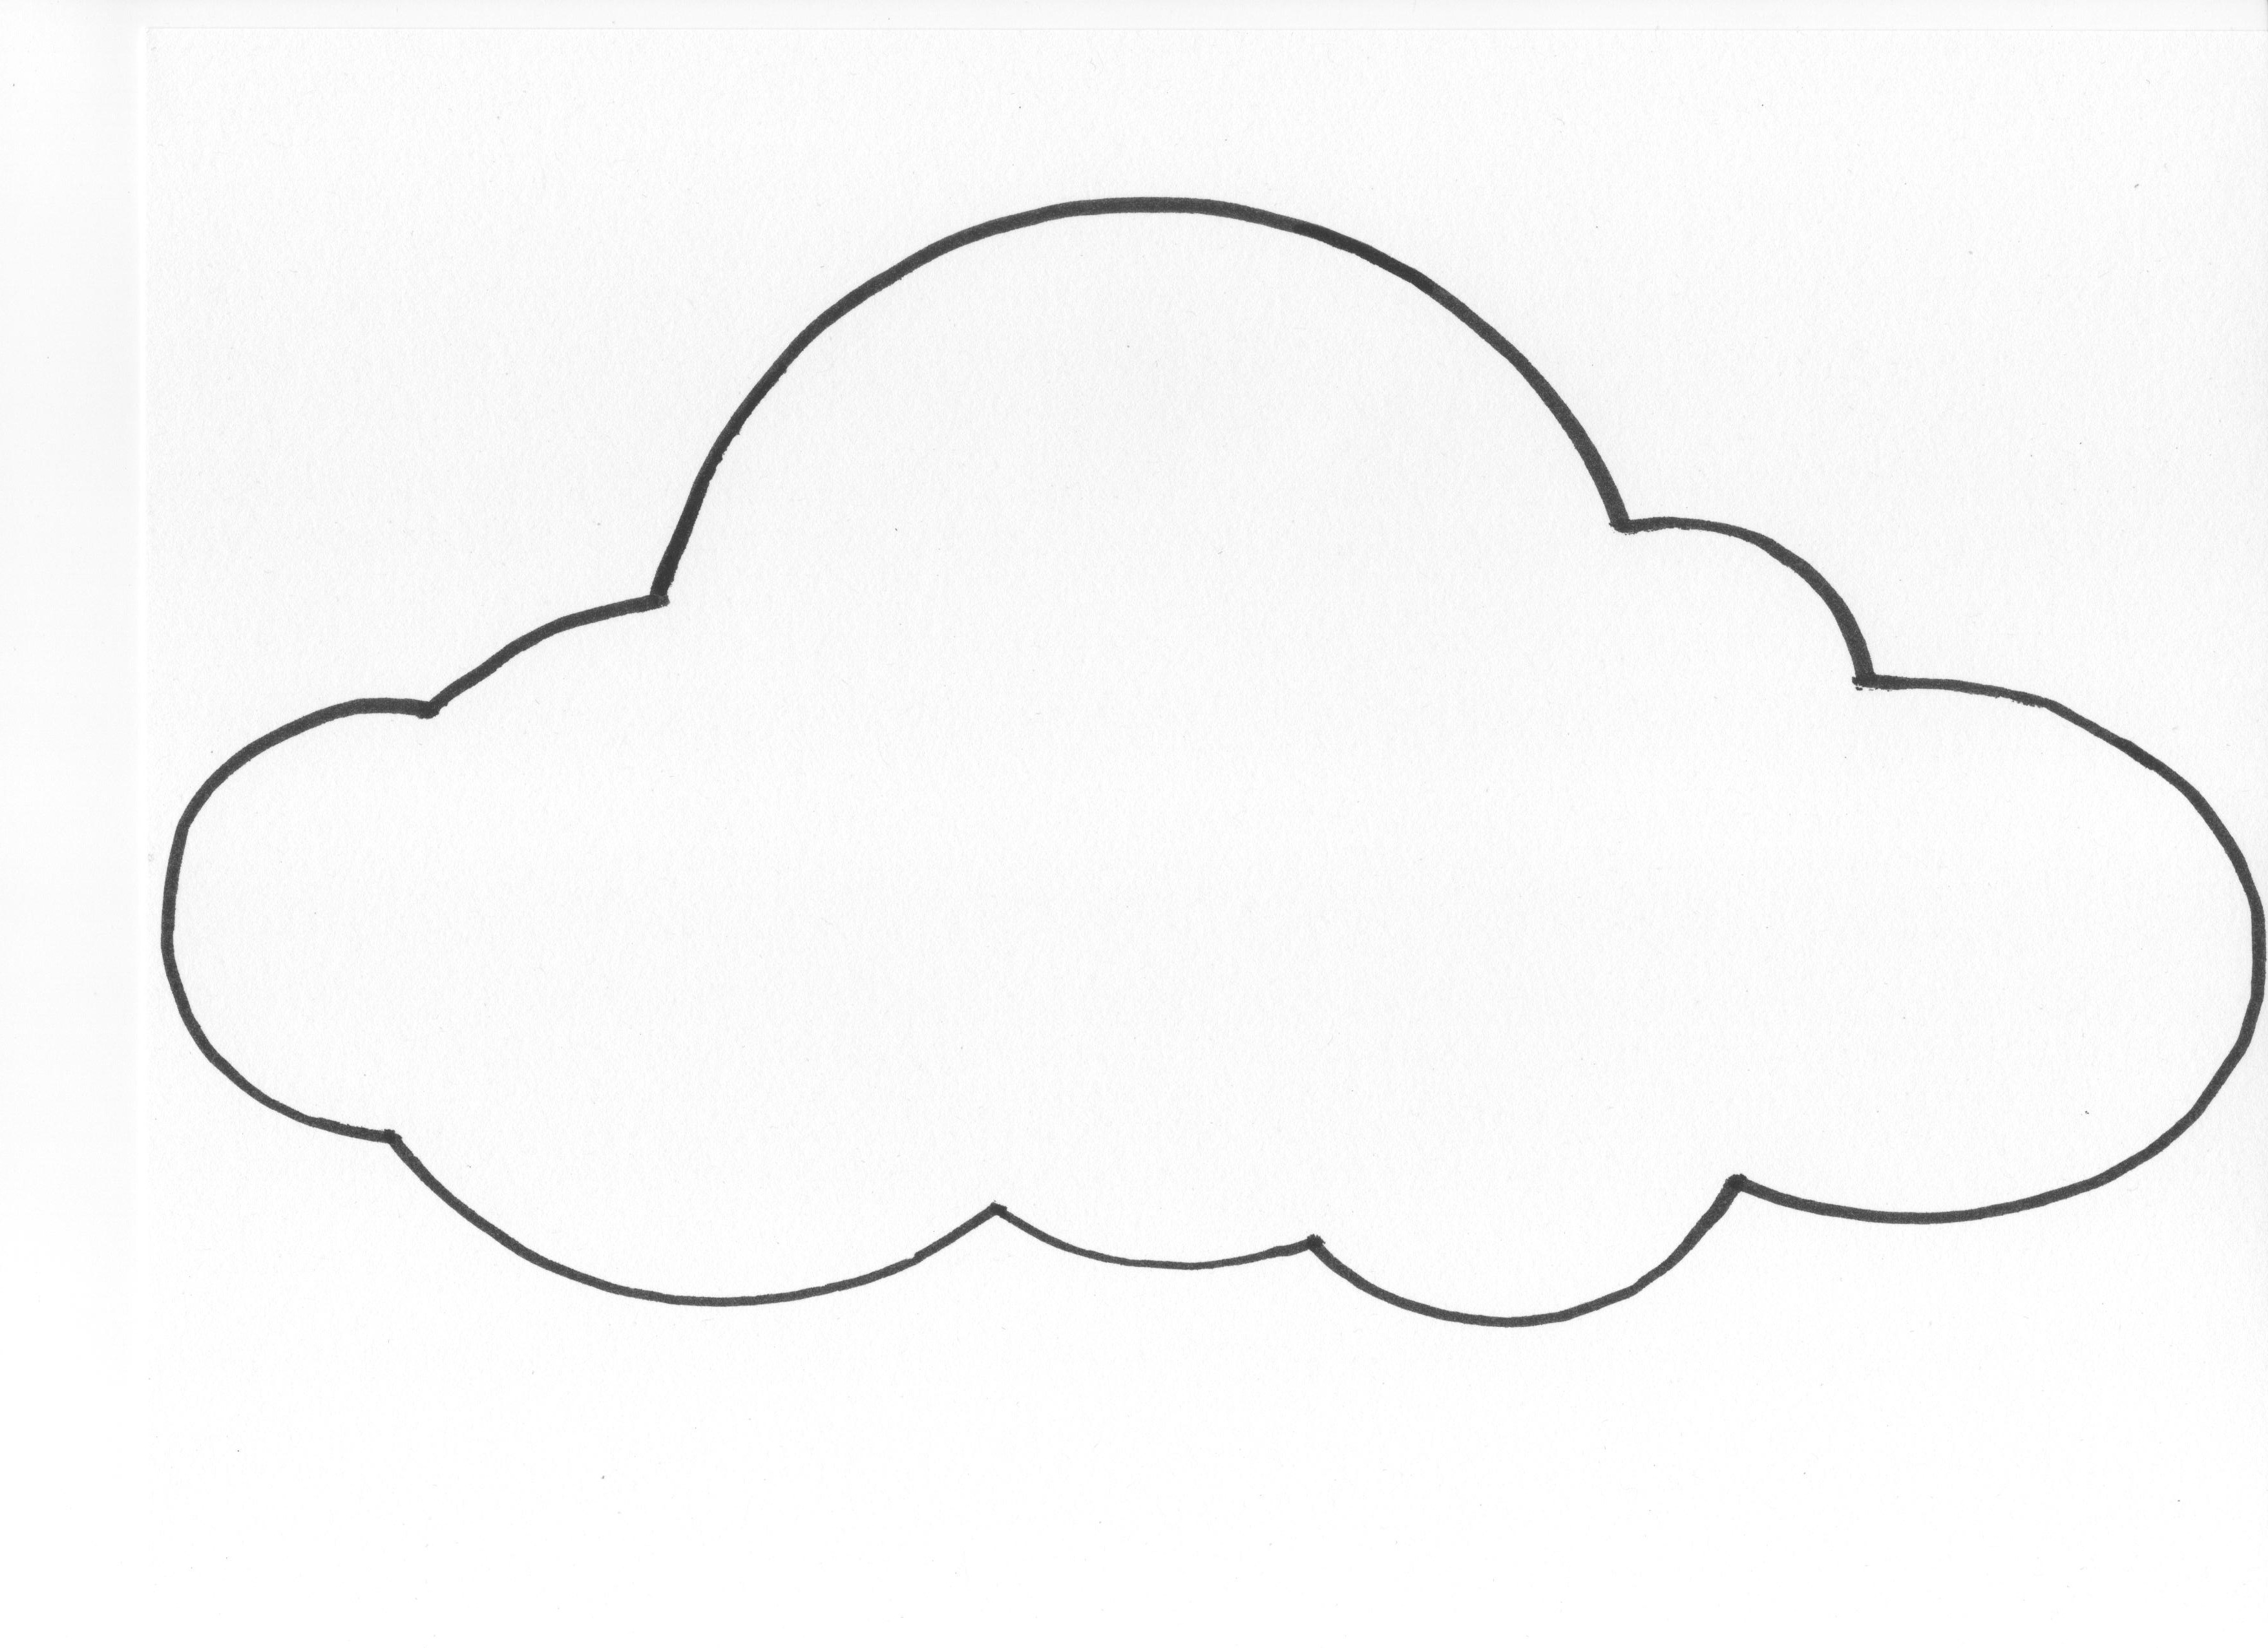 templates-of-clouds-clipart-best